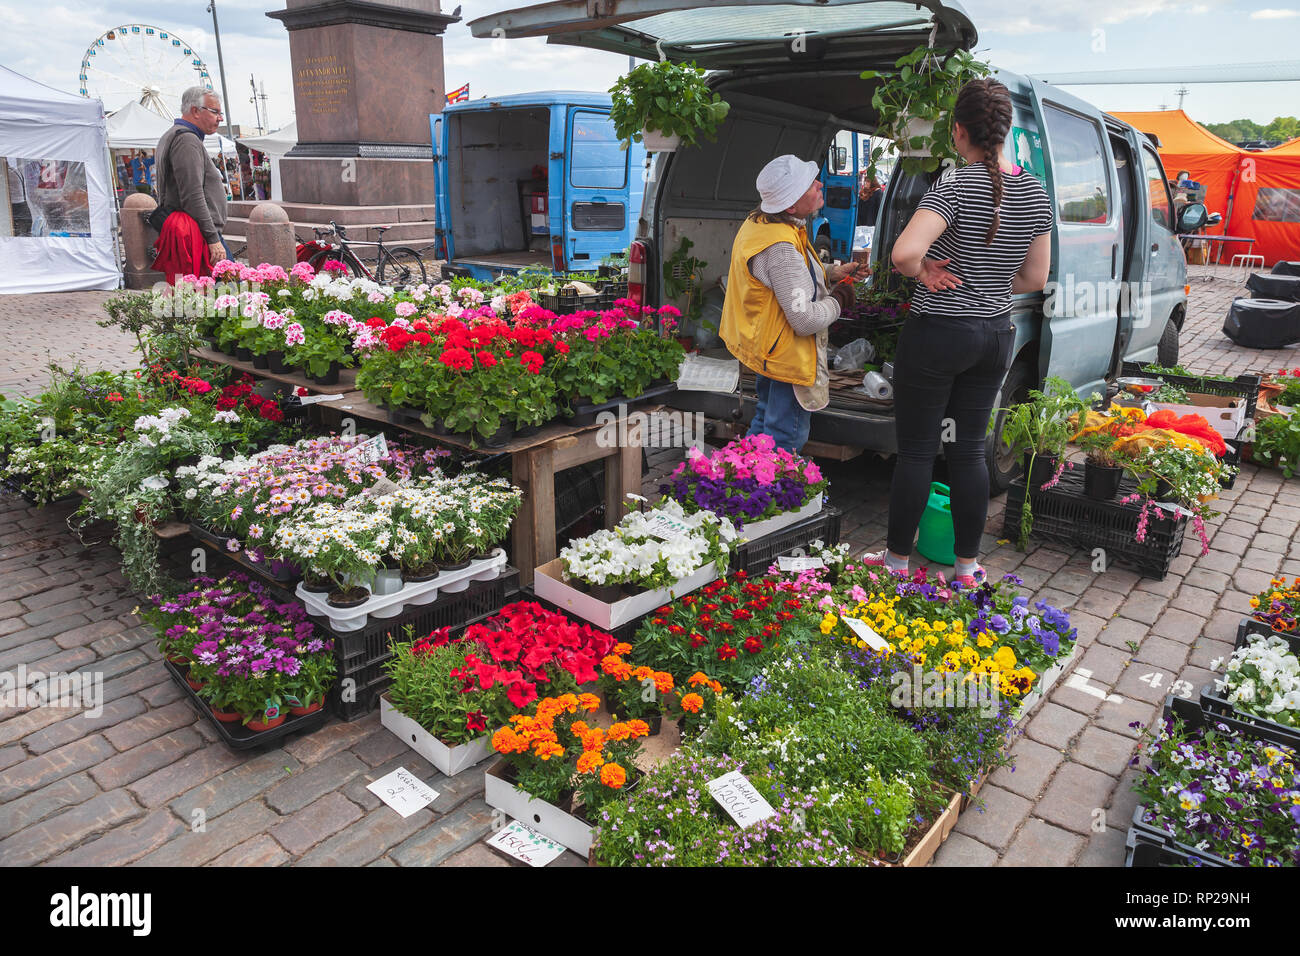 Helsinki, Finland - May 21, 2016: Flower shop with ordinary people on the street of Helsinki Stock Photo